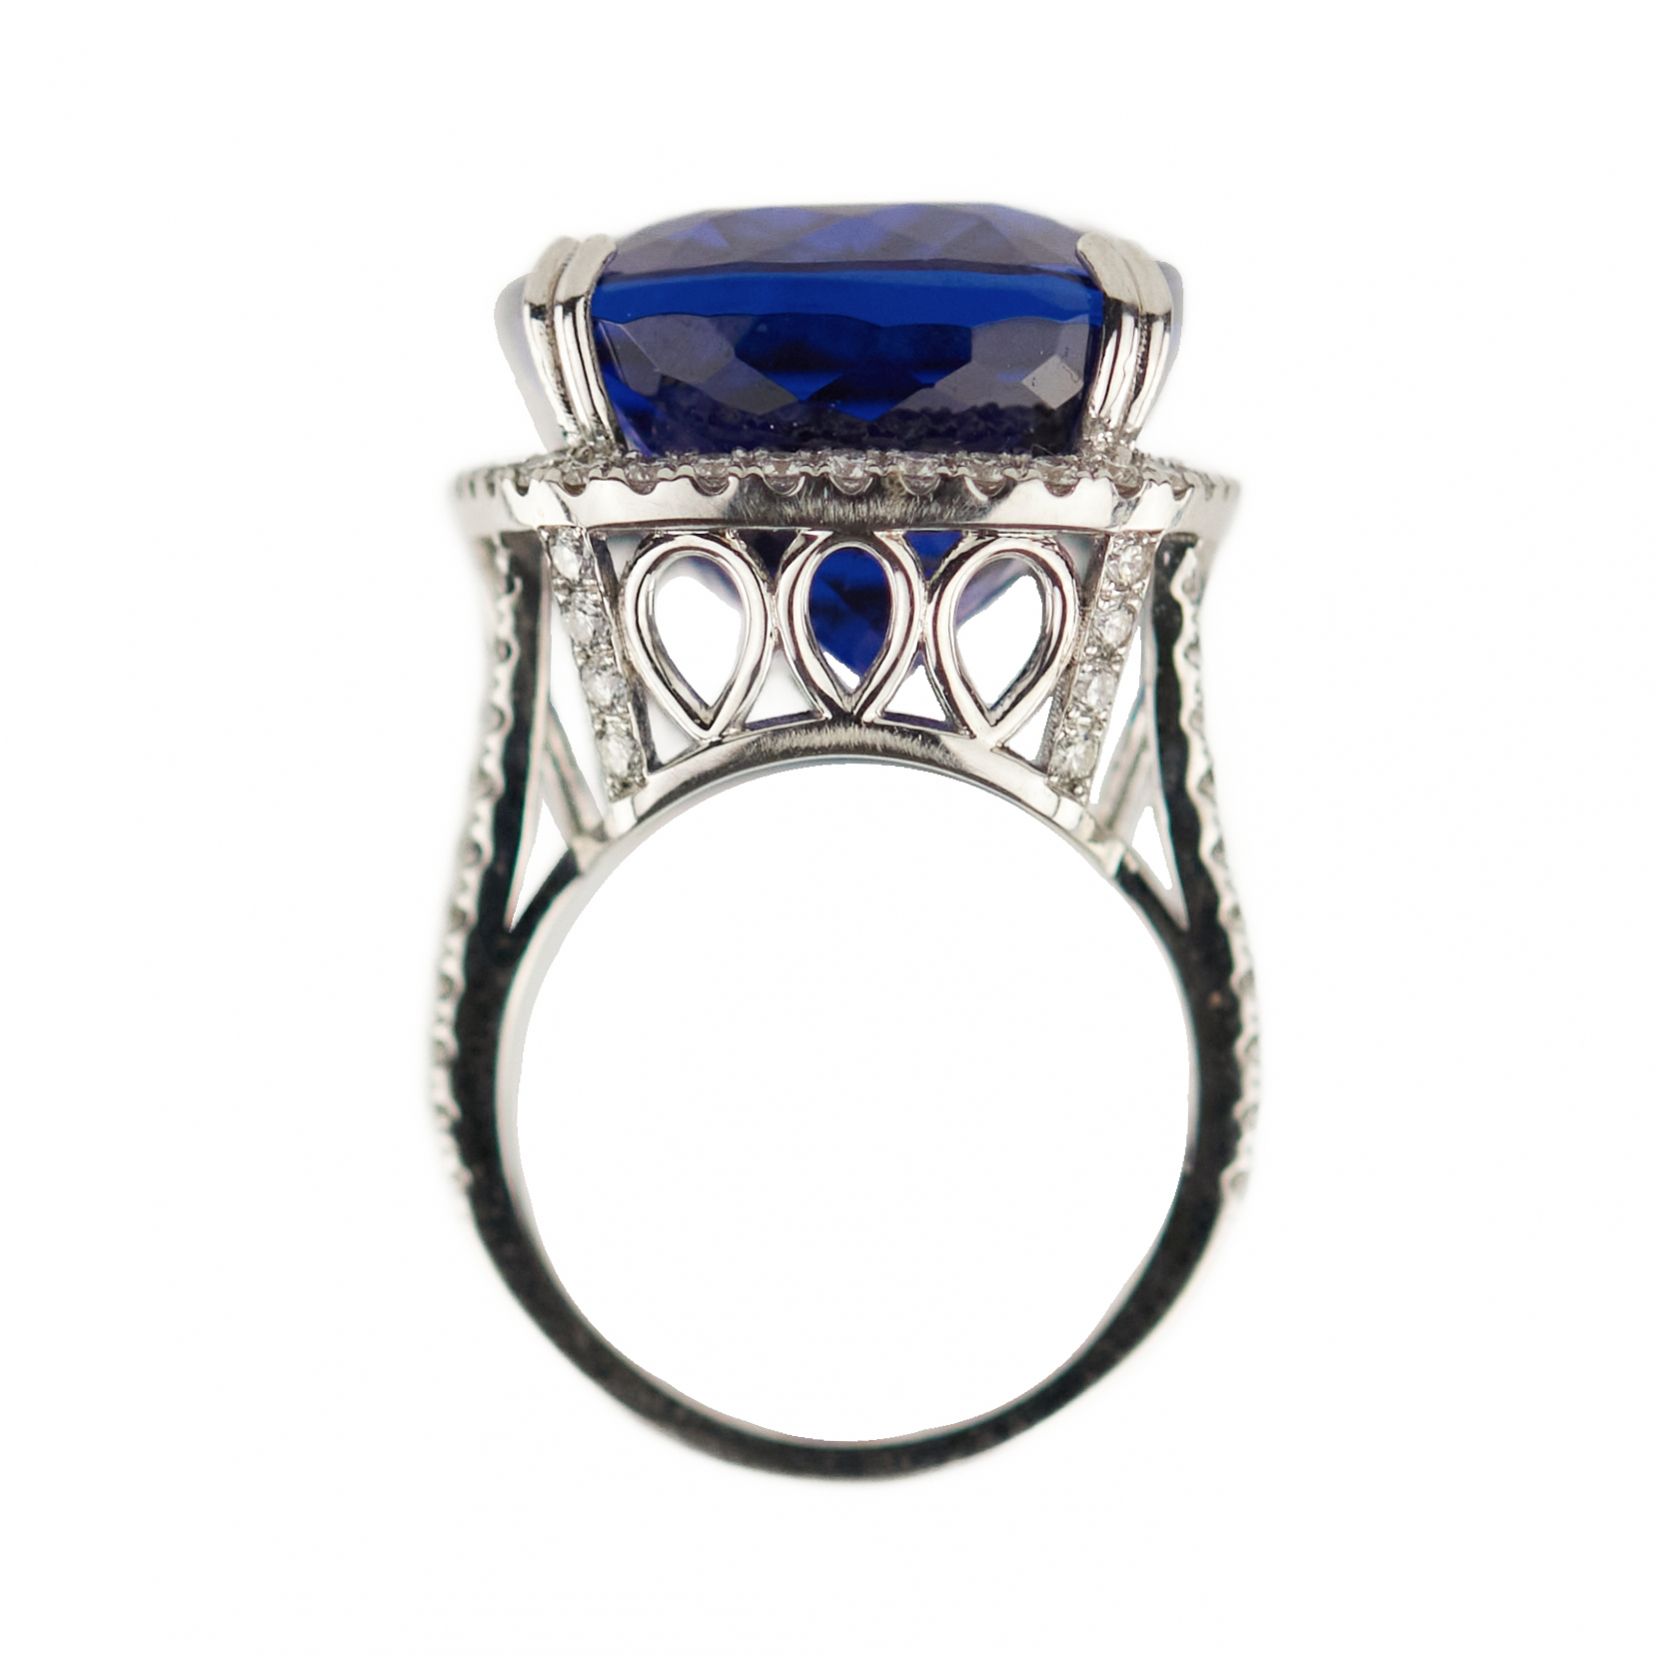 Gold ring with tanzanite and diamonds. - Image 3 of 5